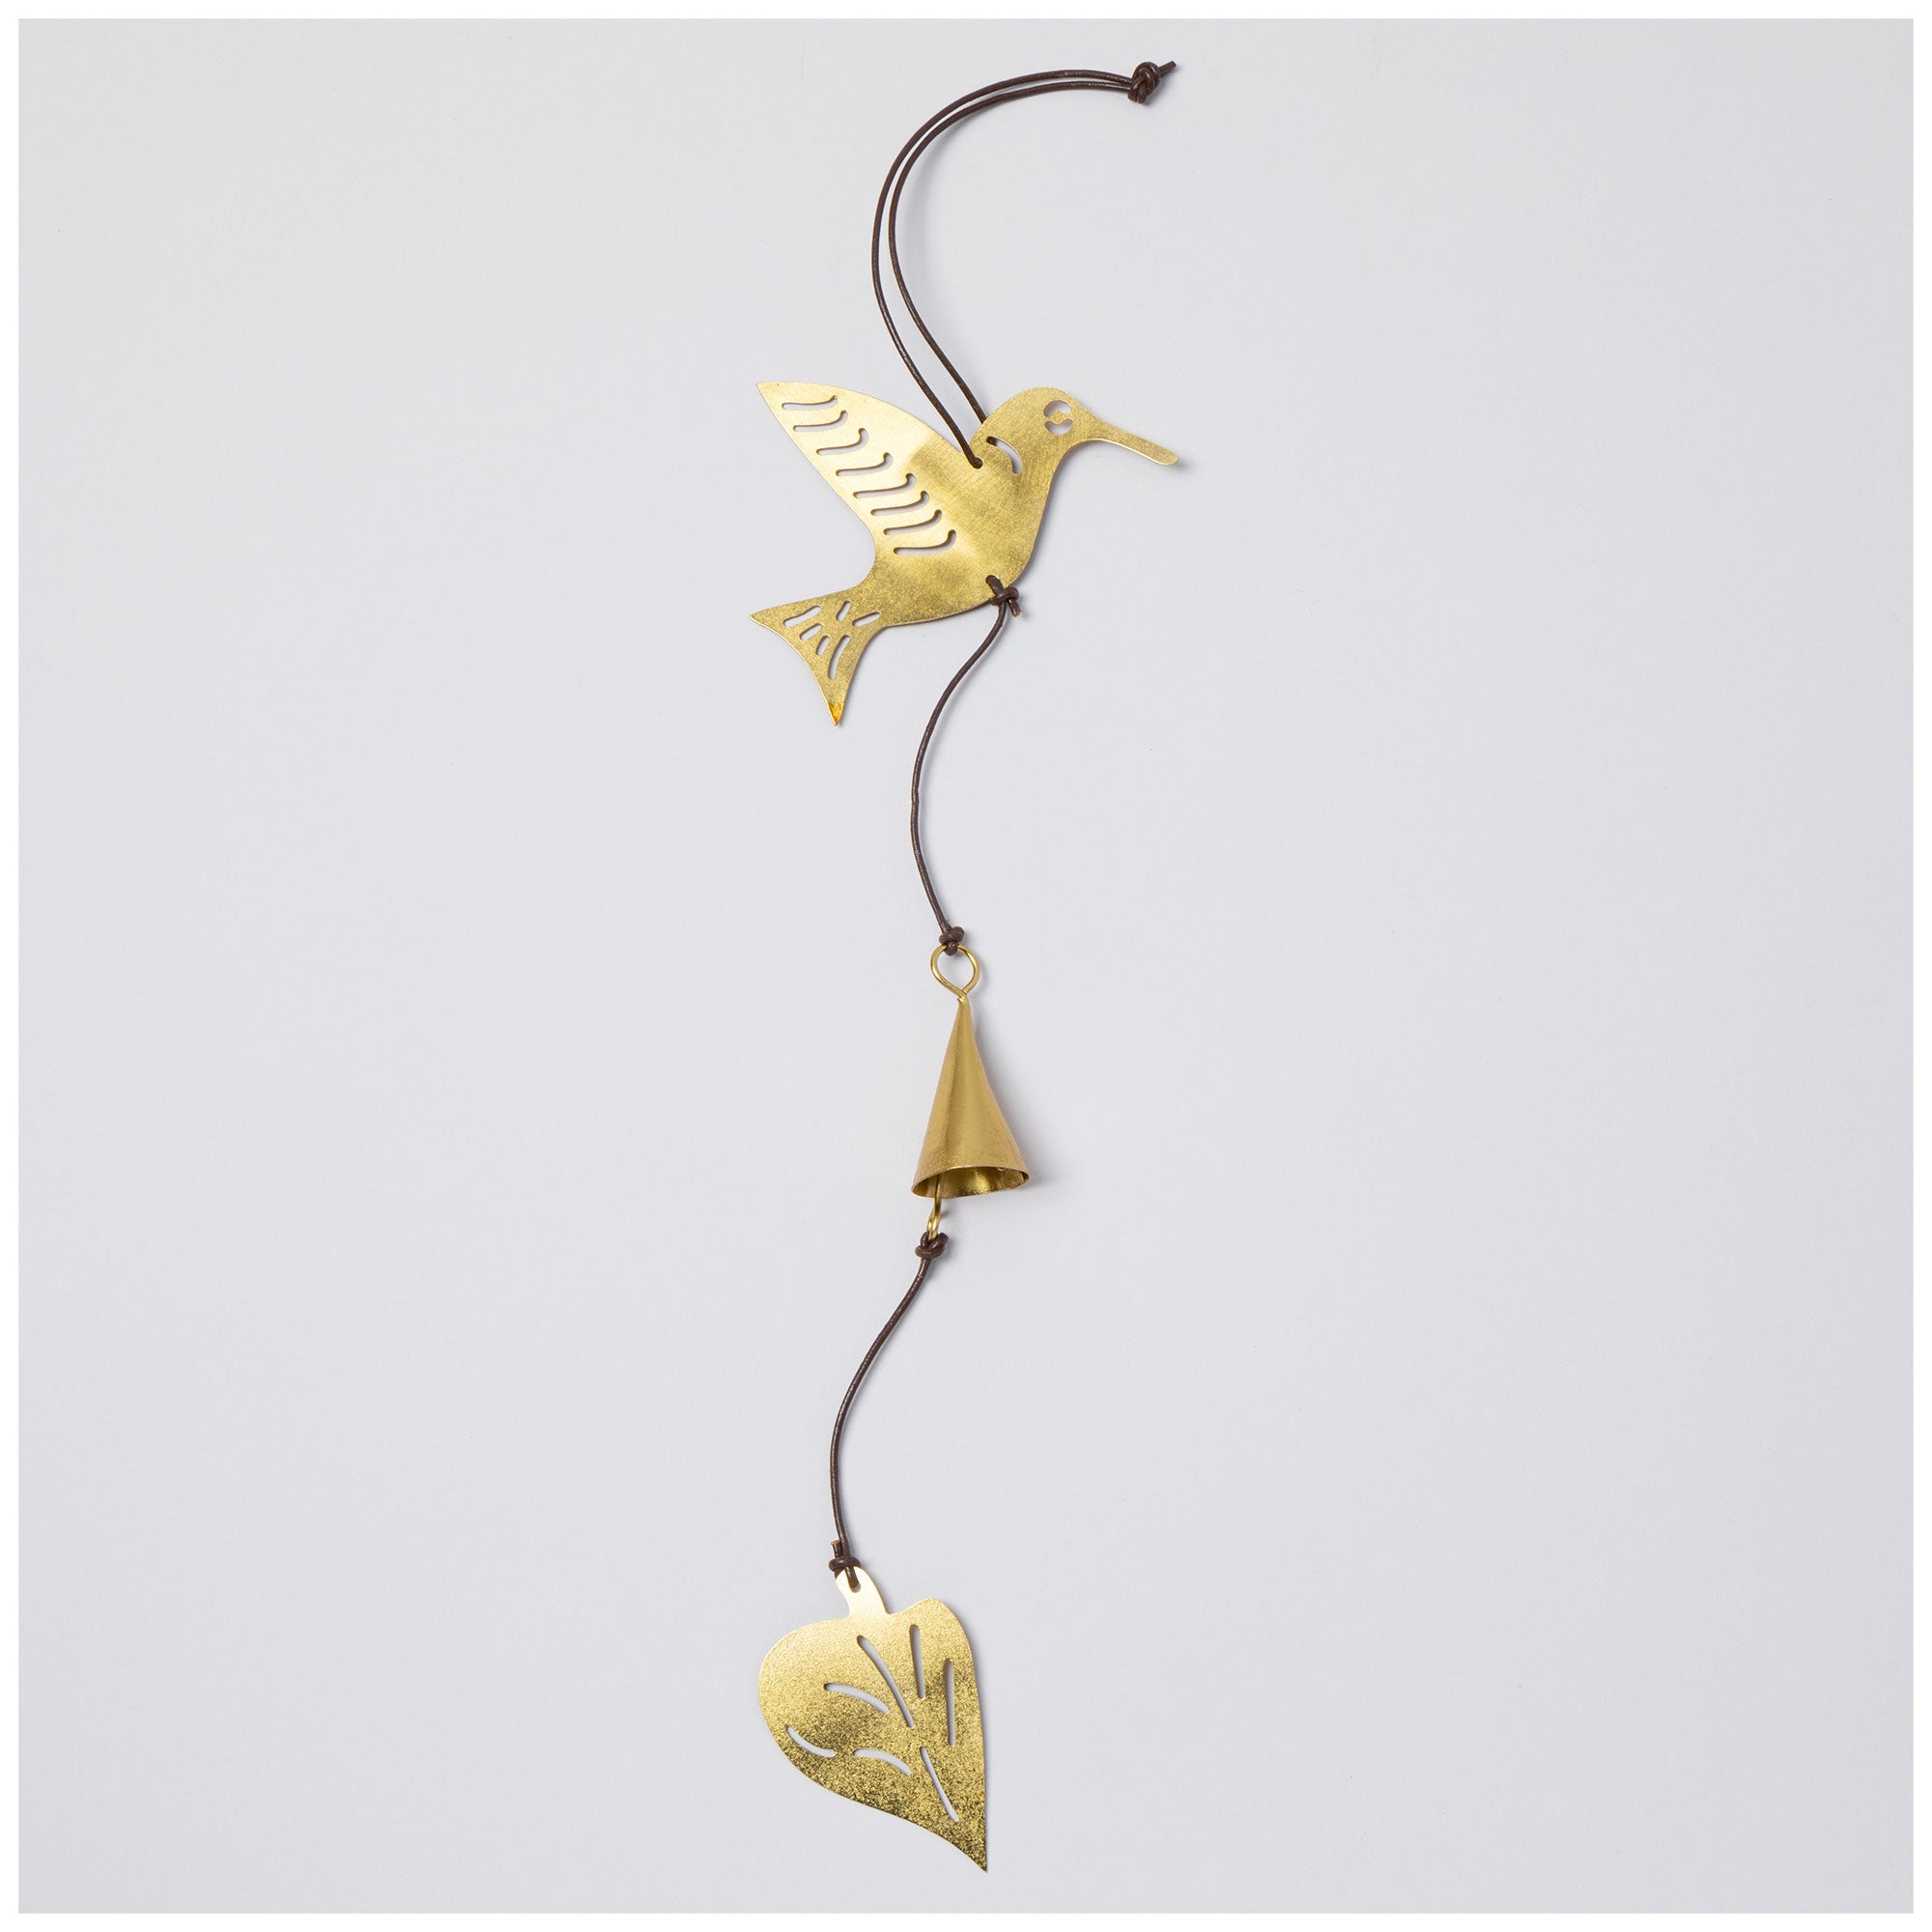 For The Birds Iron Wind Chime - Hummingbird